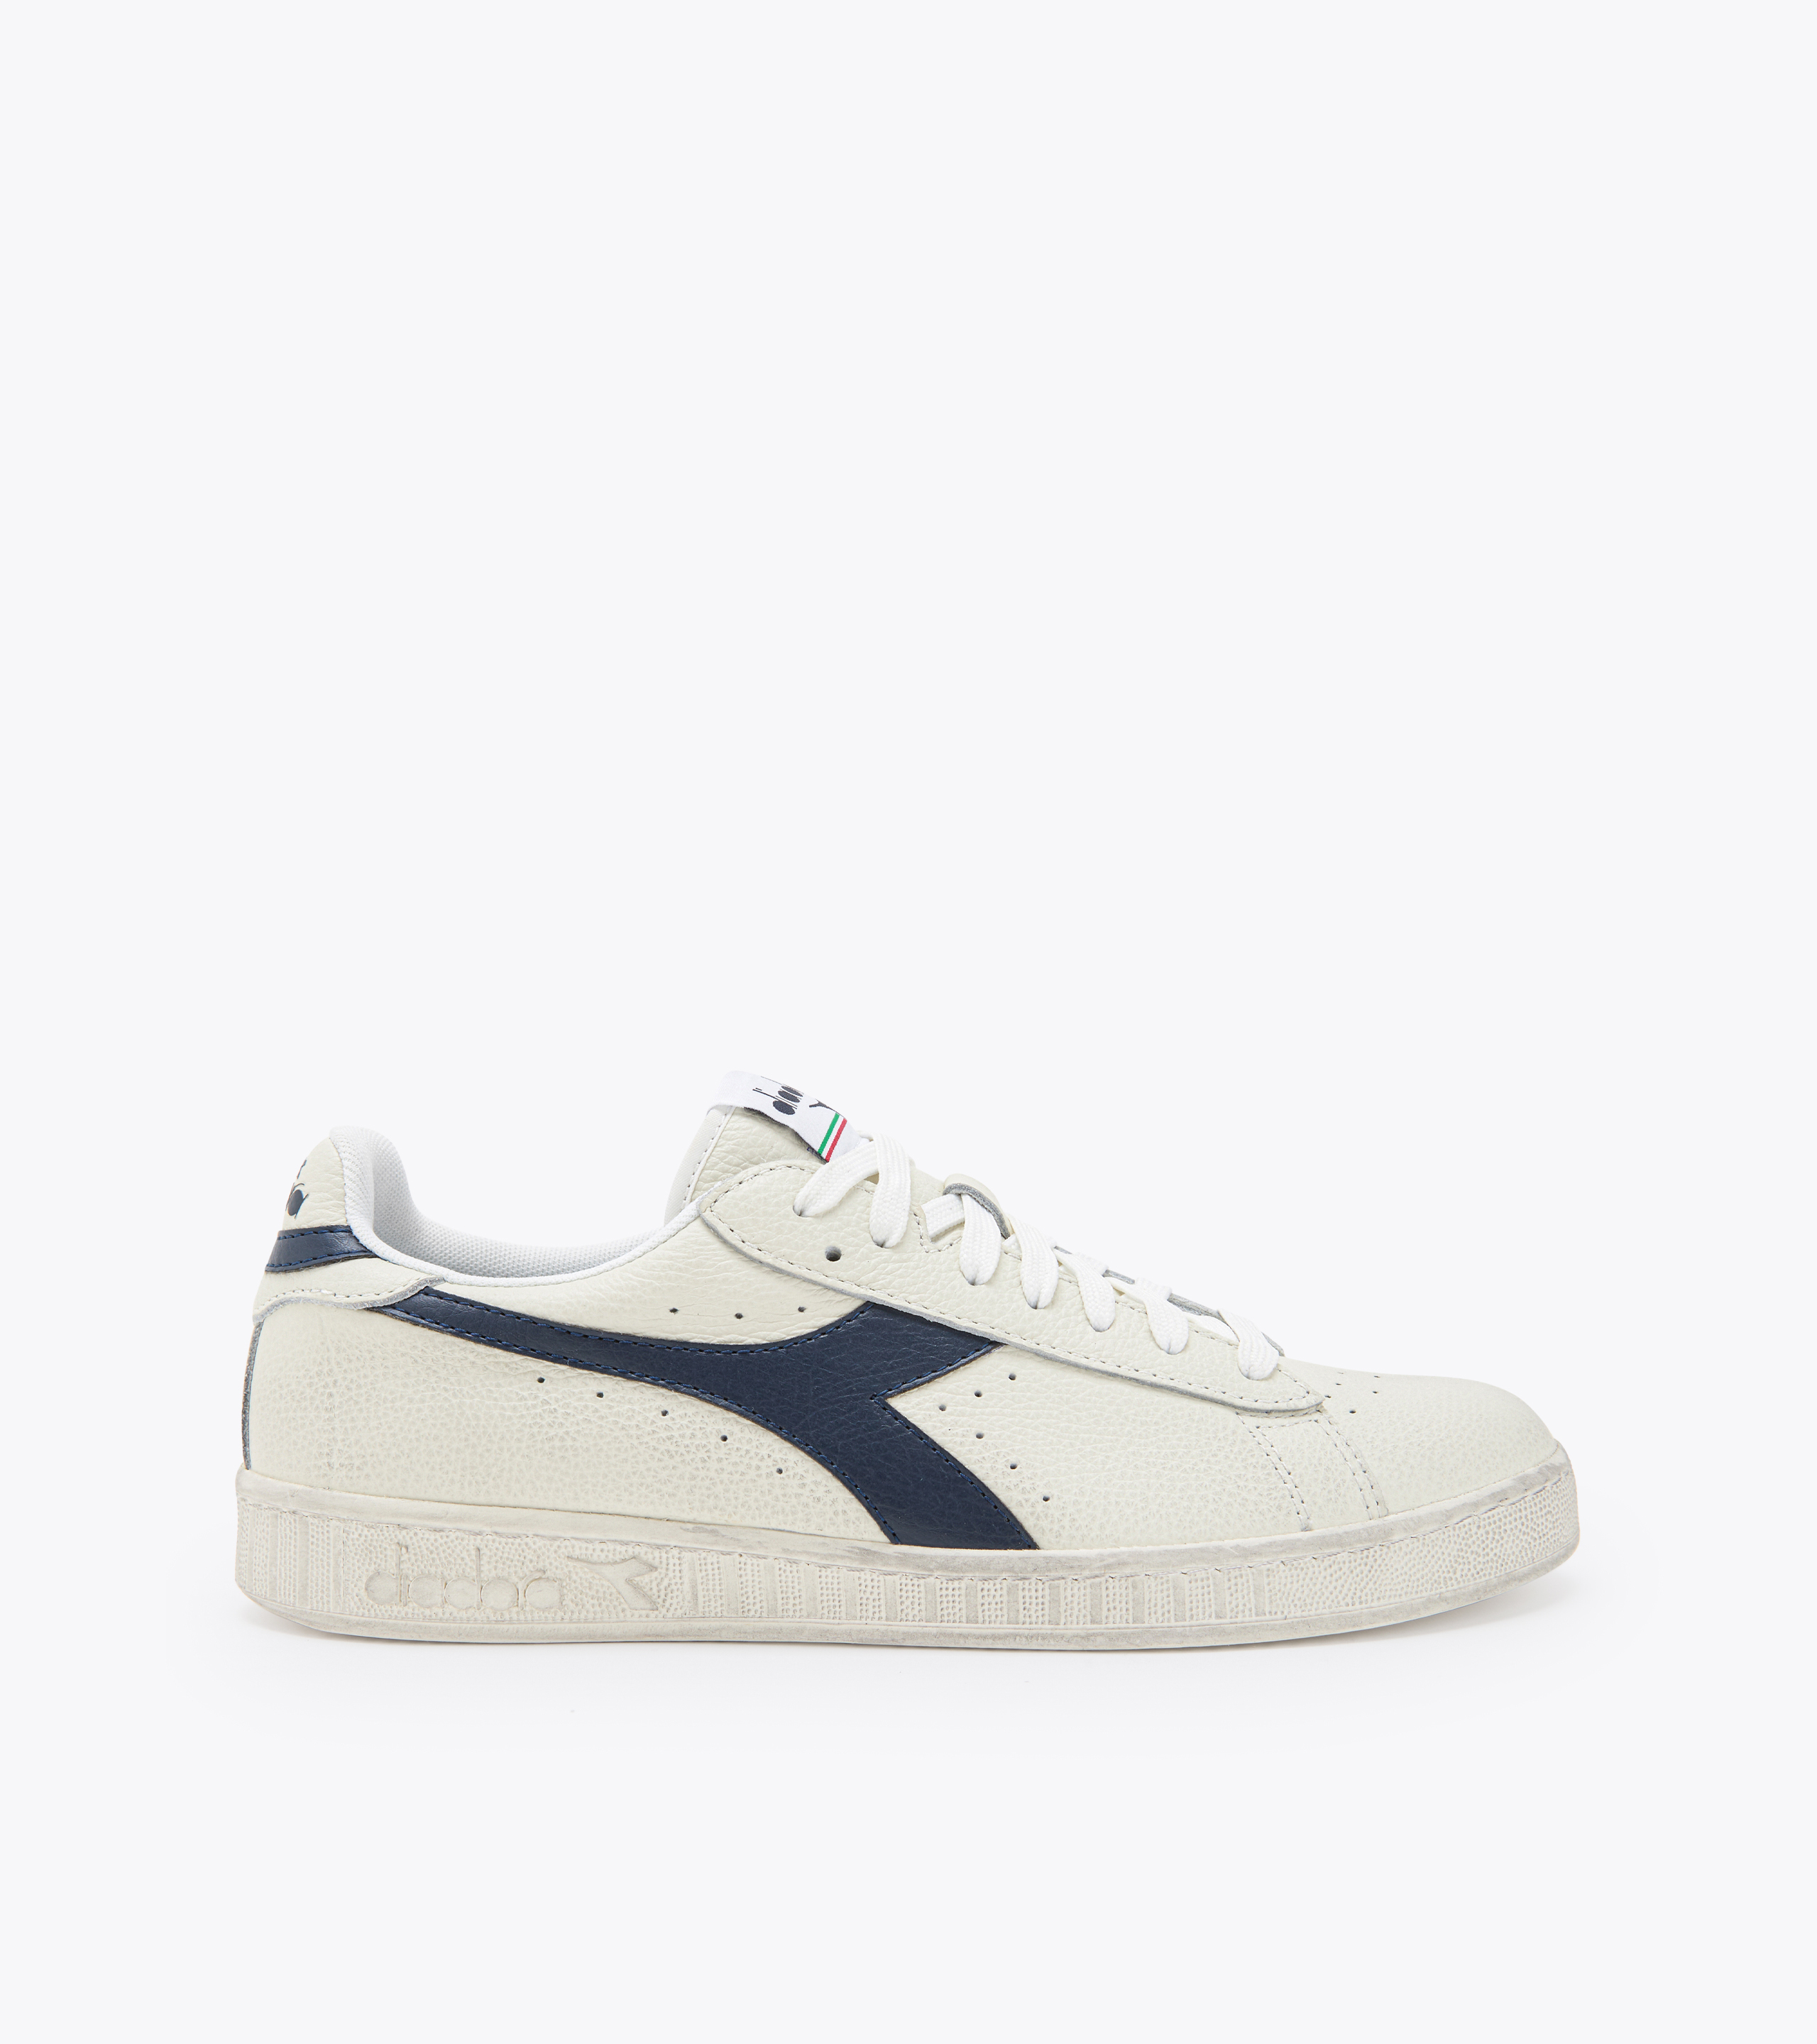 GAME L LOW WAXED Sporty sneakers - Unisex - Diadora Online Store US